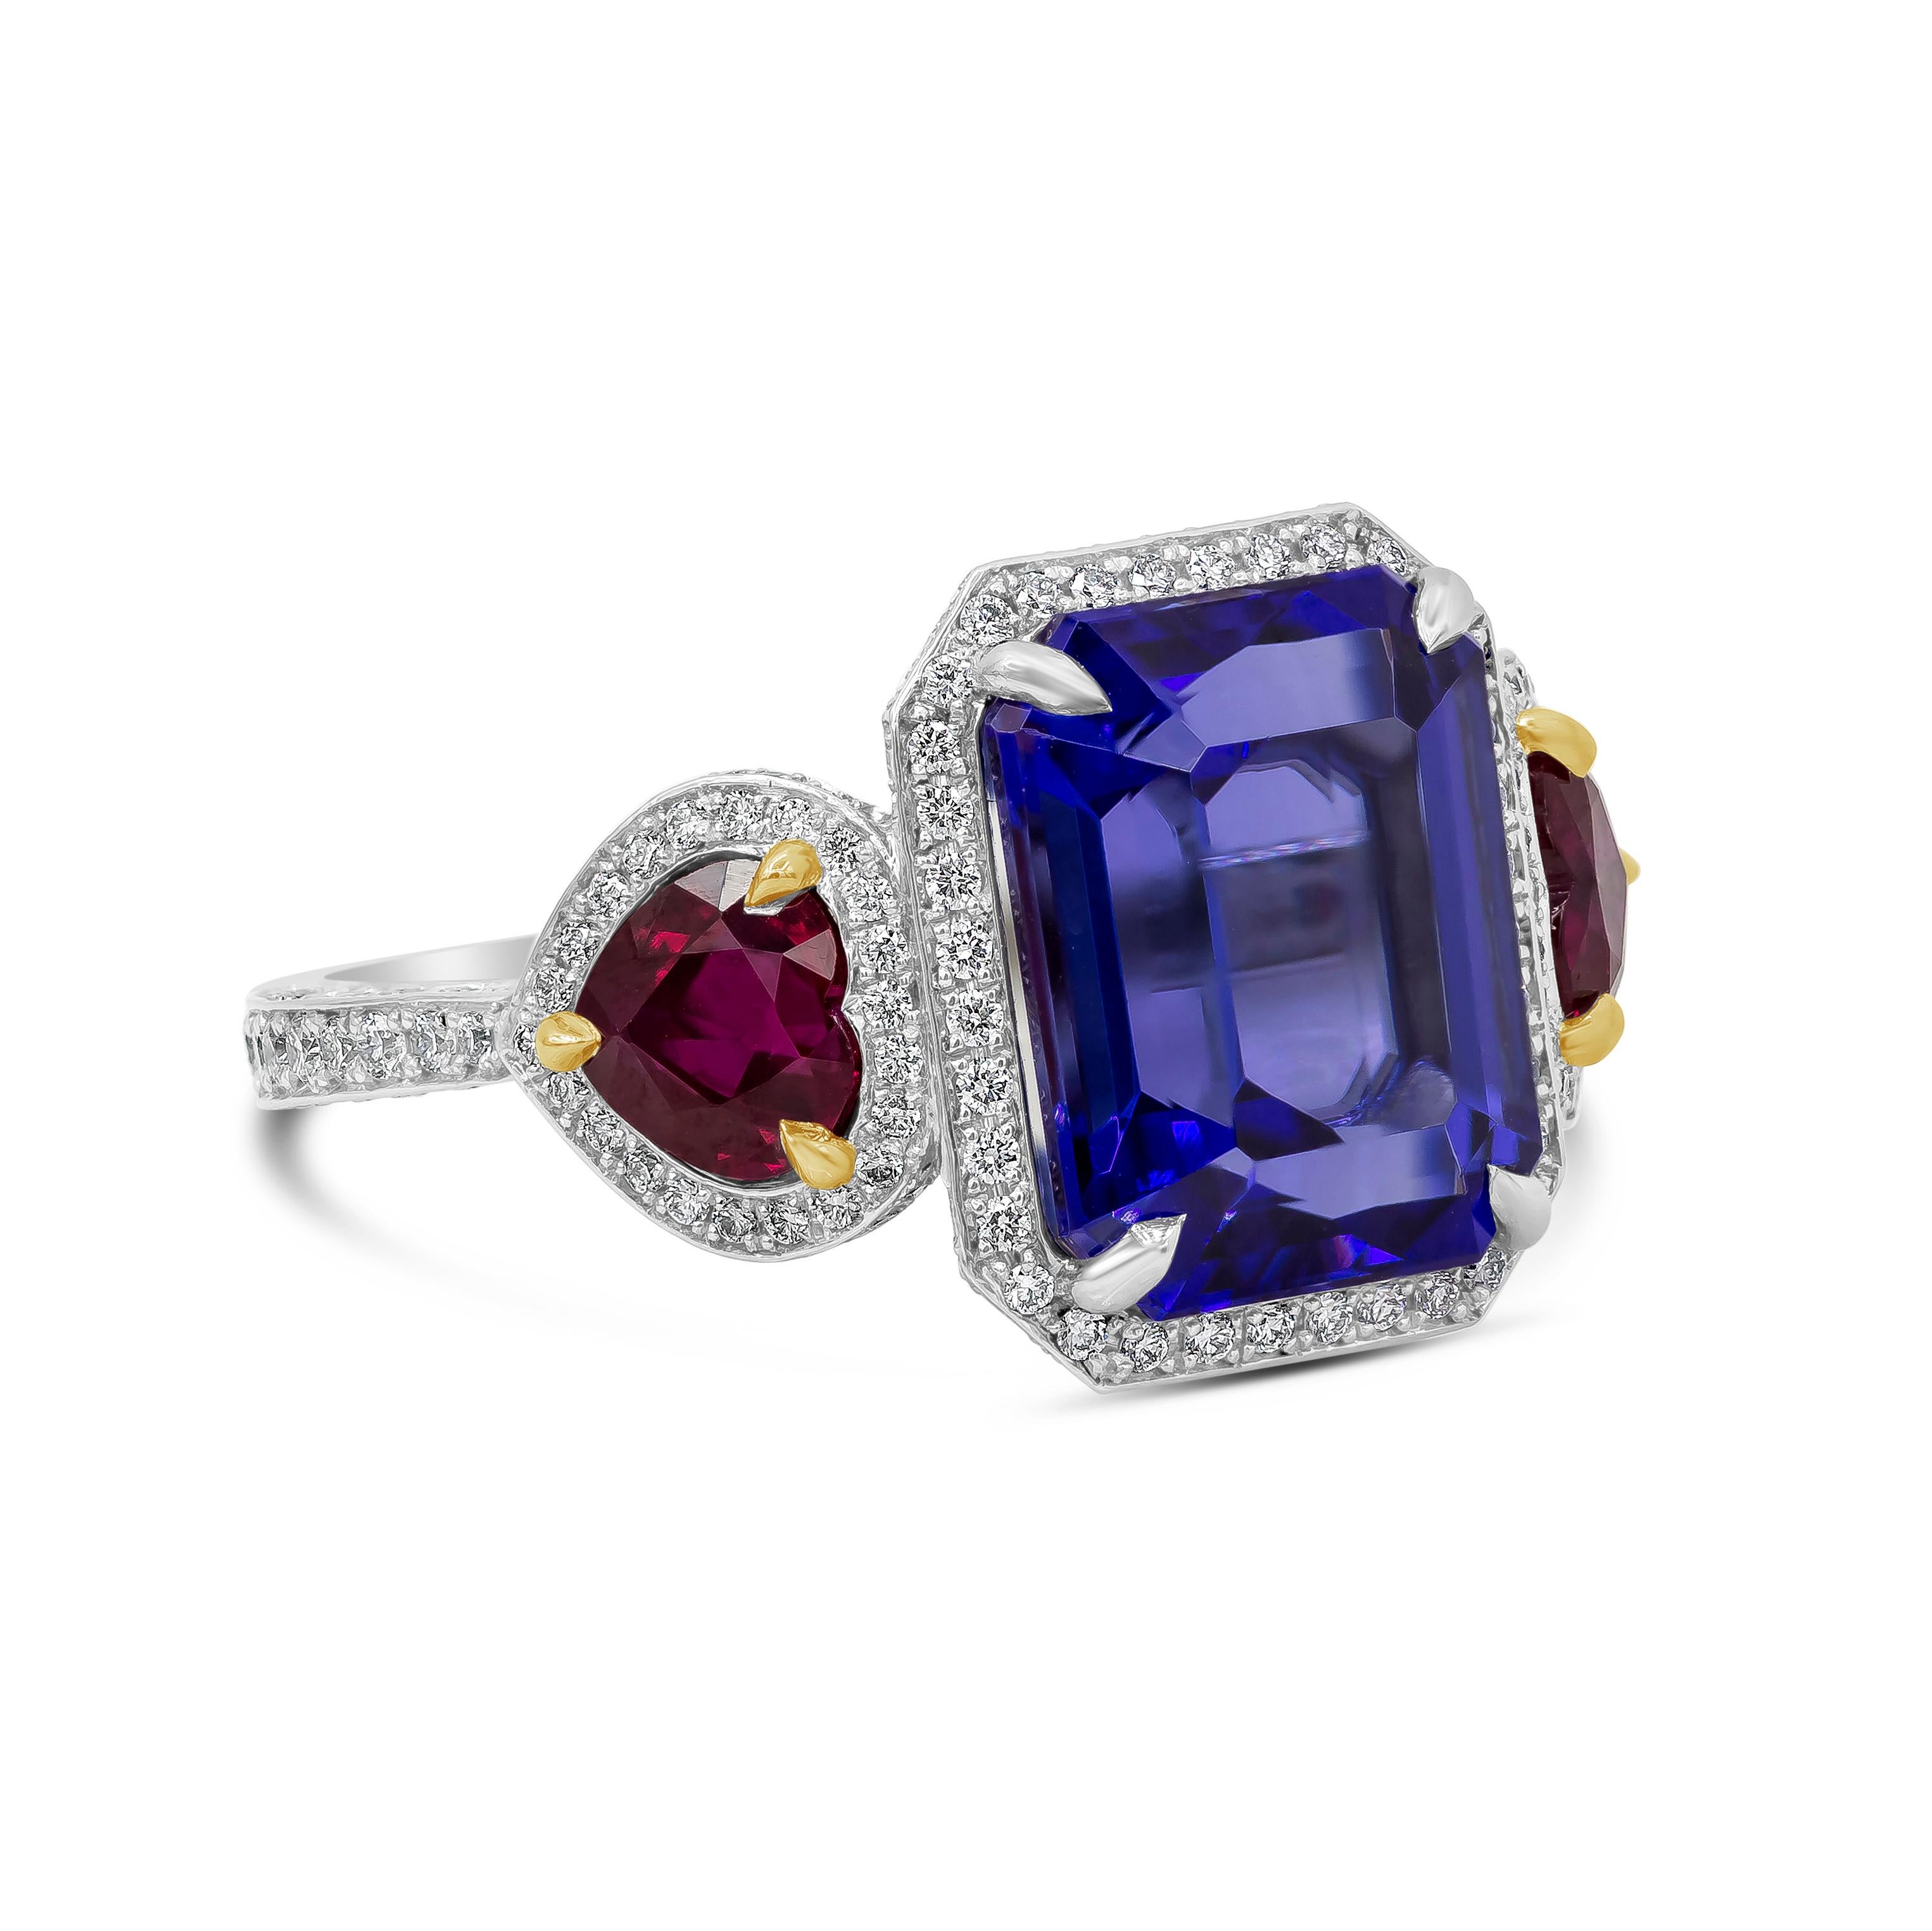 A brilliant design showcasing a purplish-blue emerald cut tanzanite, flanked by heart-shaped rubies on either side. Set in a diamond encrusted surmount made in platinum and accented with yellow gold. Rubies weigh 1.68 carats; diamonds weigh 1.21